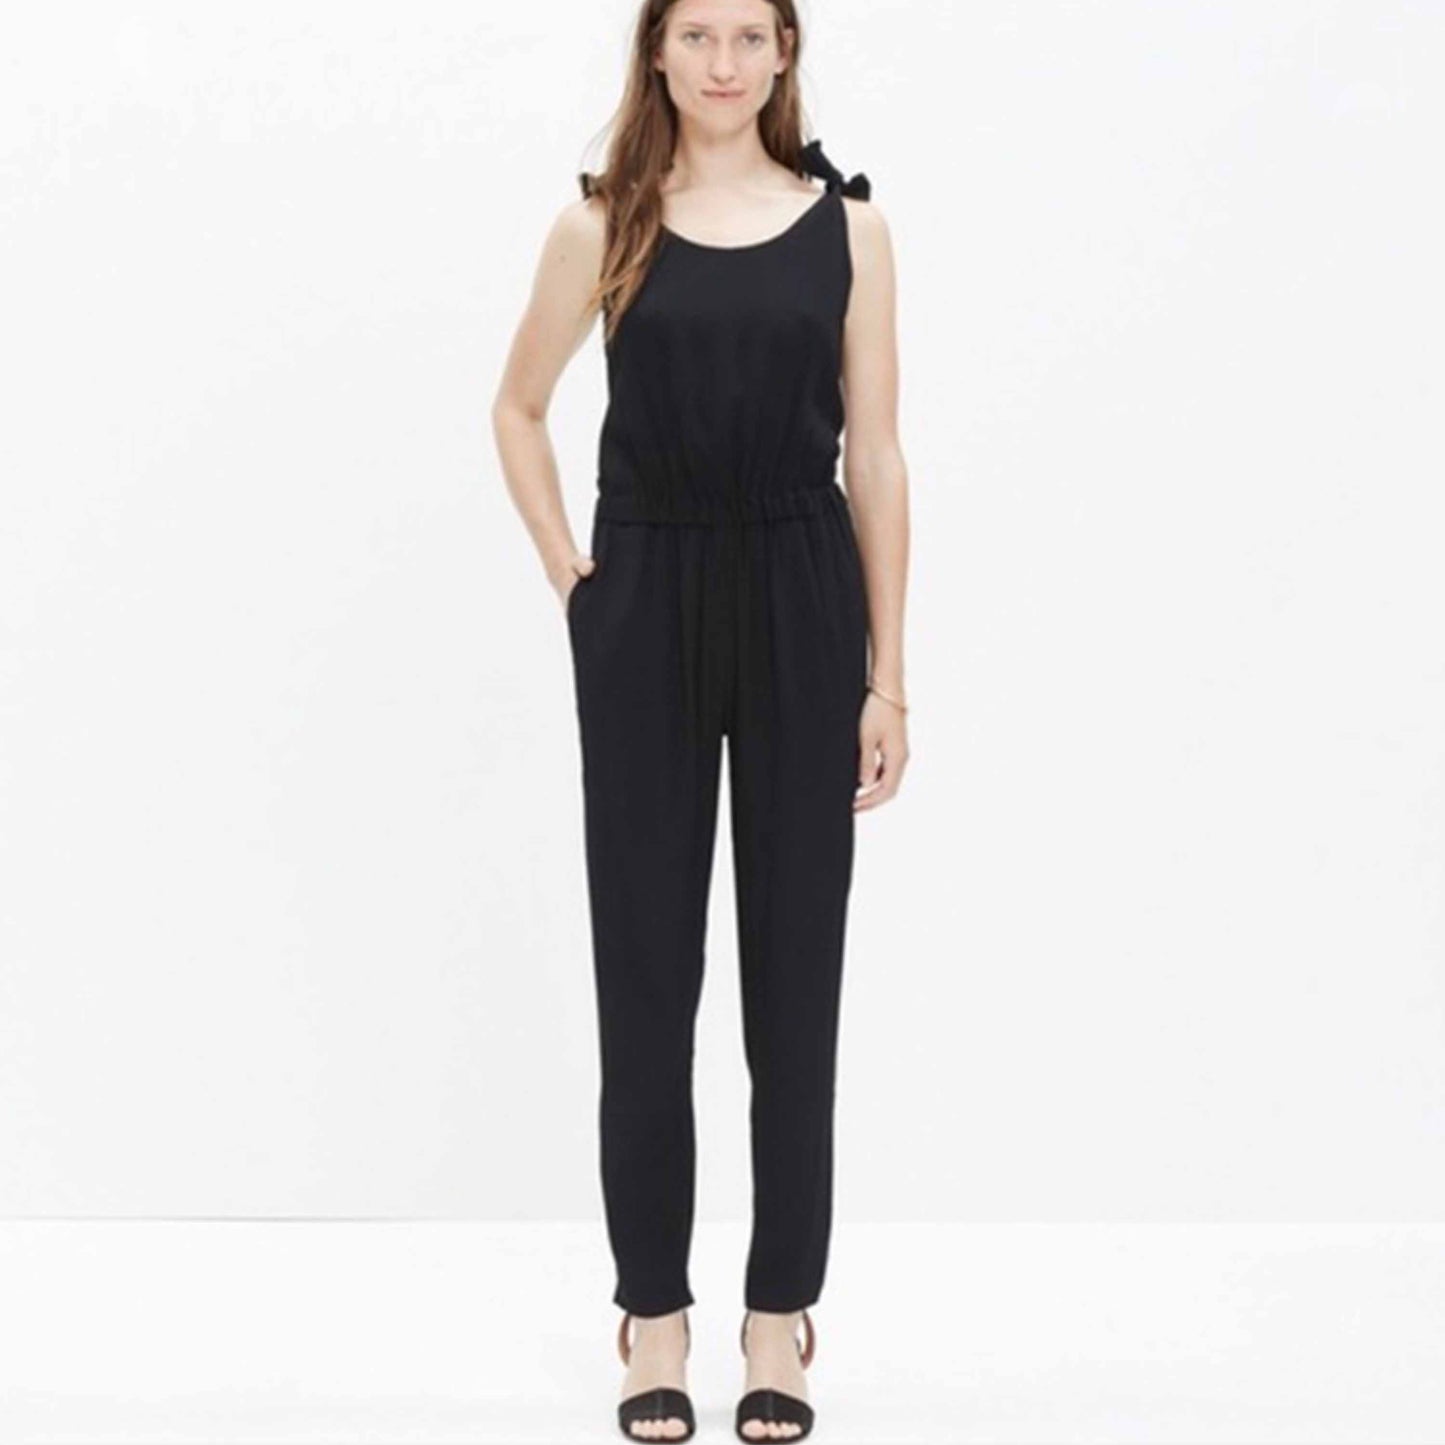 madewell tie-shoulder jumpsuit - size small